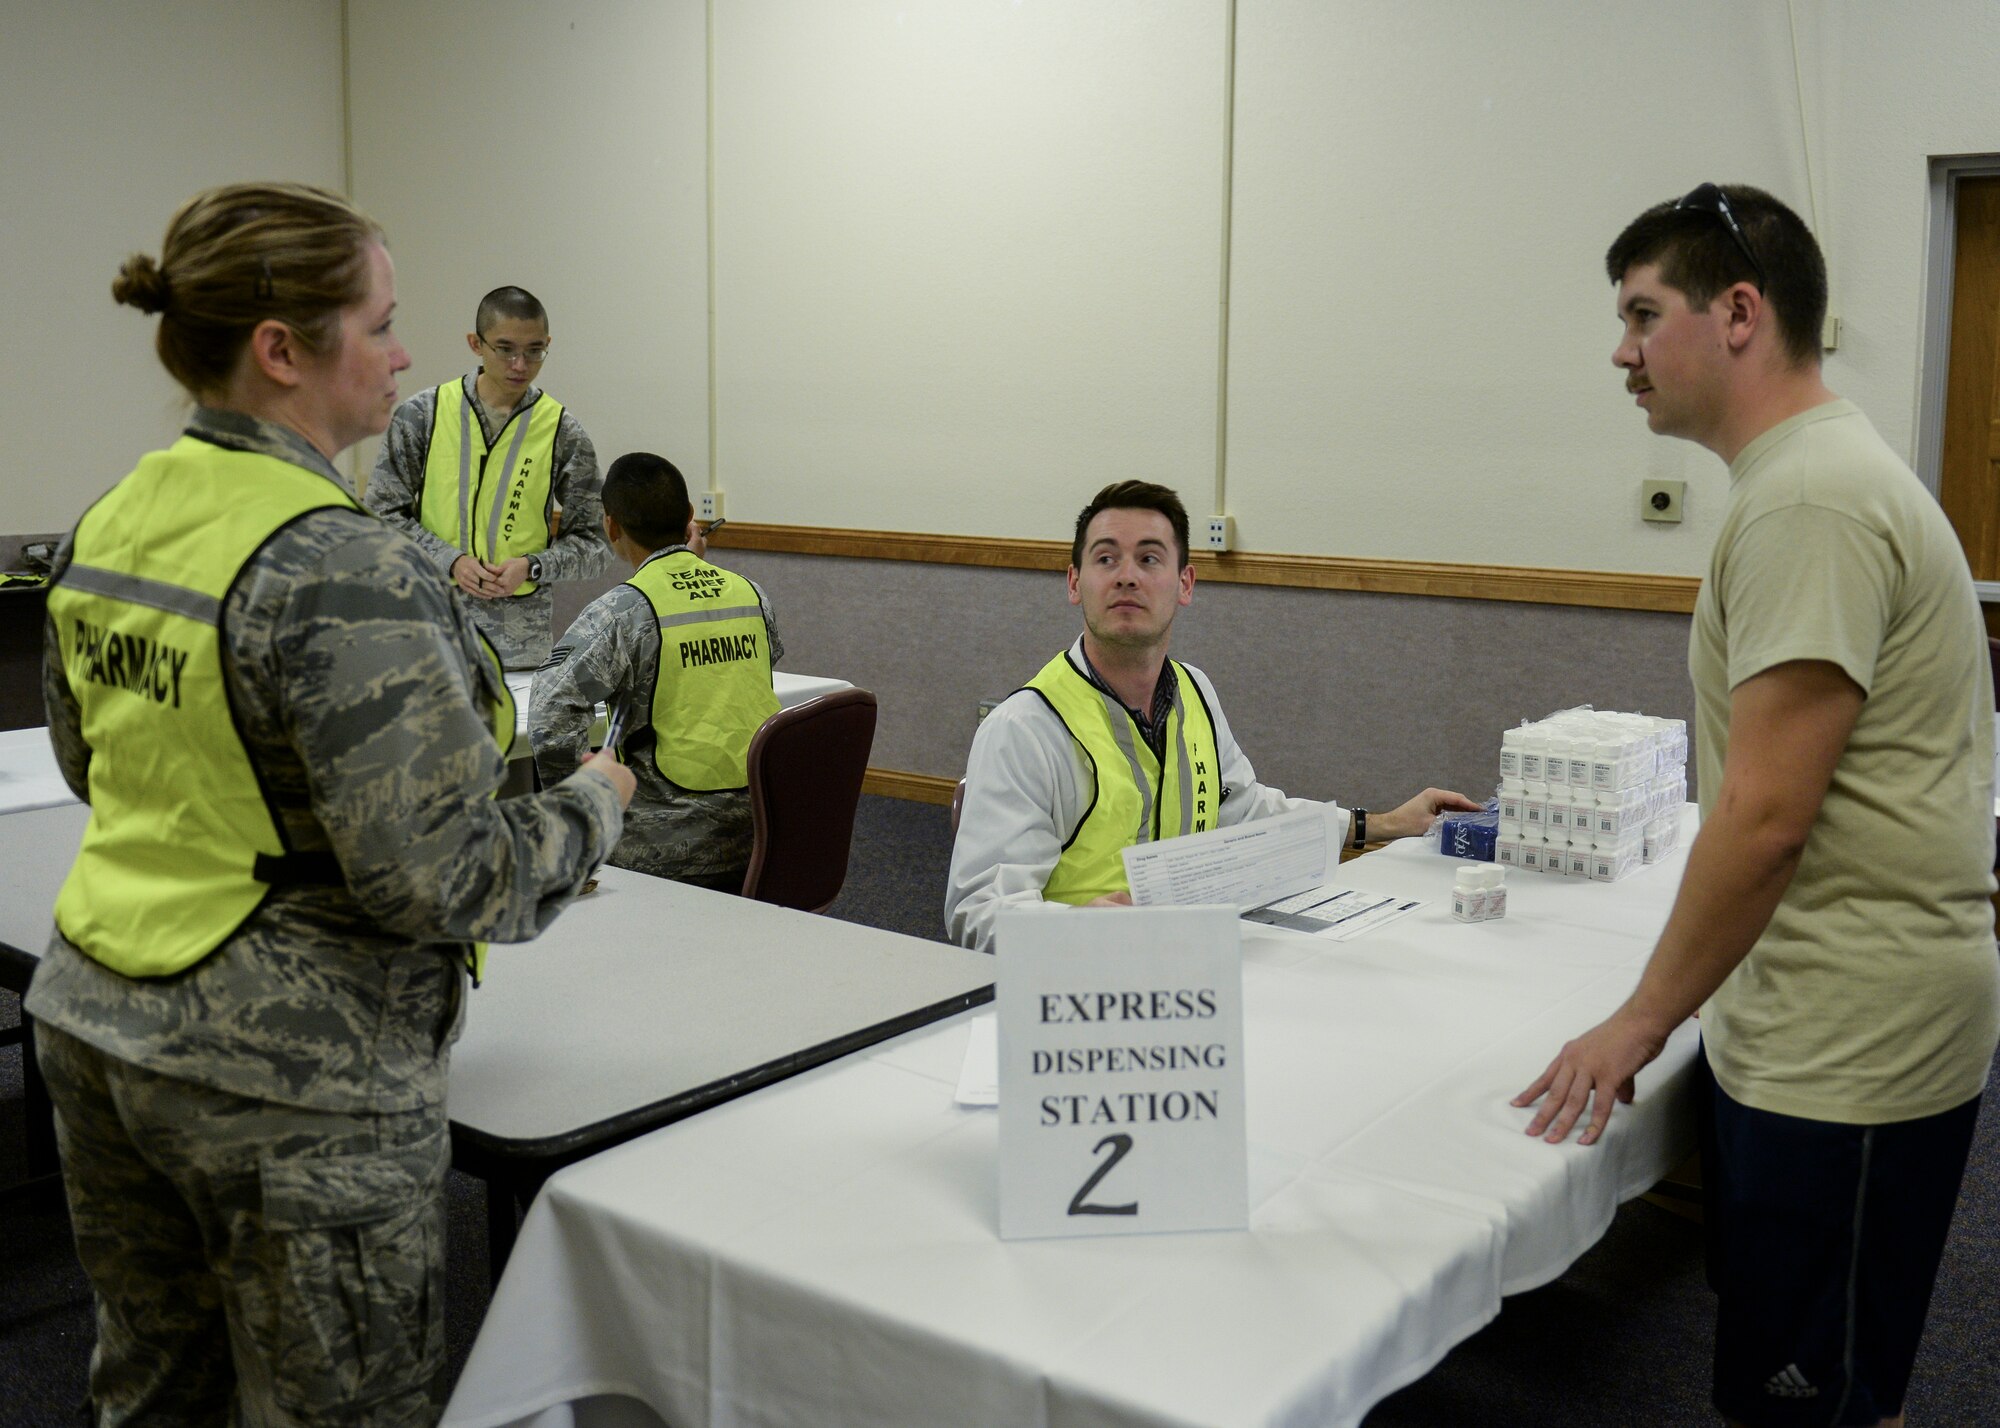 Participants in a public health exercise stand near a point of distribution station at Nellis Air Force Base, Nev., Sept. 30, 2015. The 99th Medical Group conducted a public health exercise on base with local partners in the Clark County area which tested each participant in how they would respond to contracting or deal with individuals who contracted aerosolized tularemia, a serious infection disease which can be used as a biological warfare agent. (U.S. Air Force photo by Airman 1st Class Rachel Loftis)